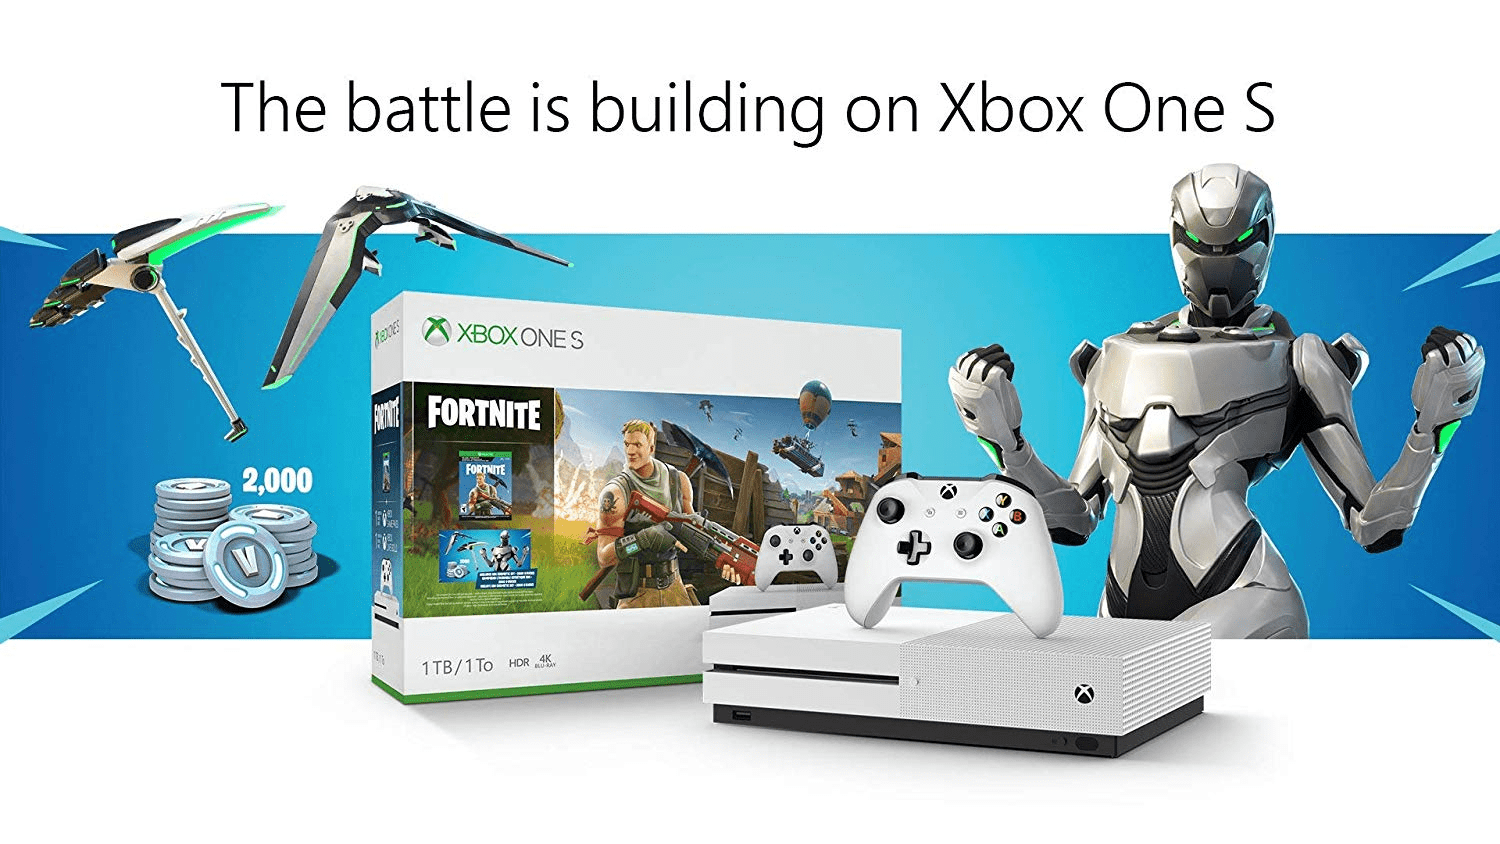 Xbox One FORTNITE Console Unboxing (Eon Skin Bundle) Battle Royale Solo  Victory Gameplay 